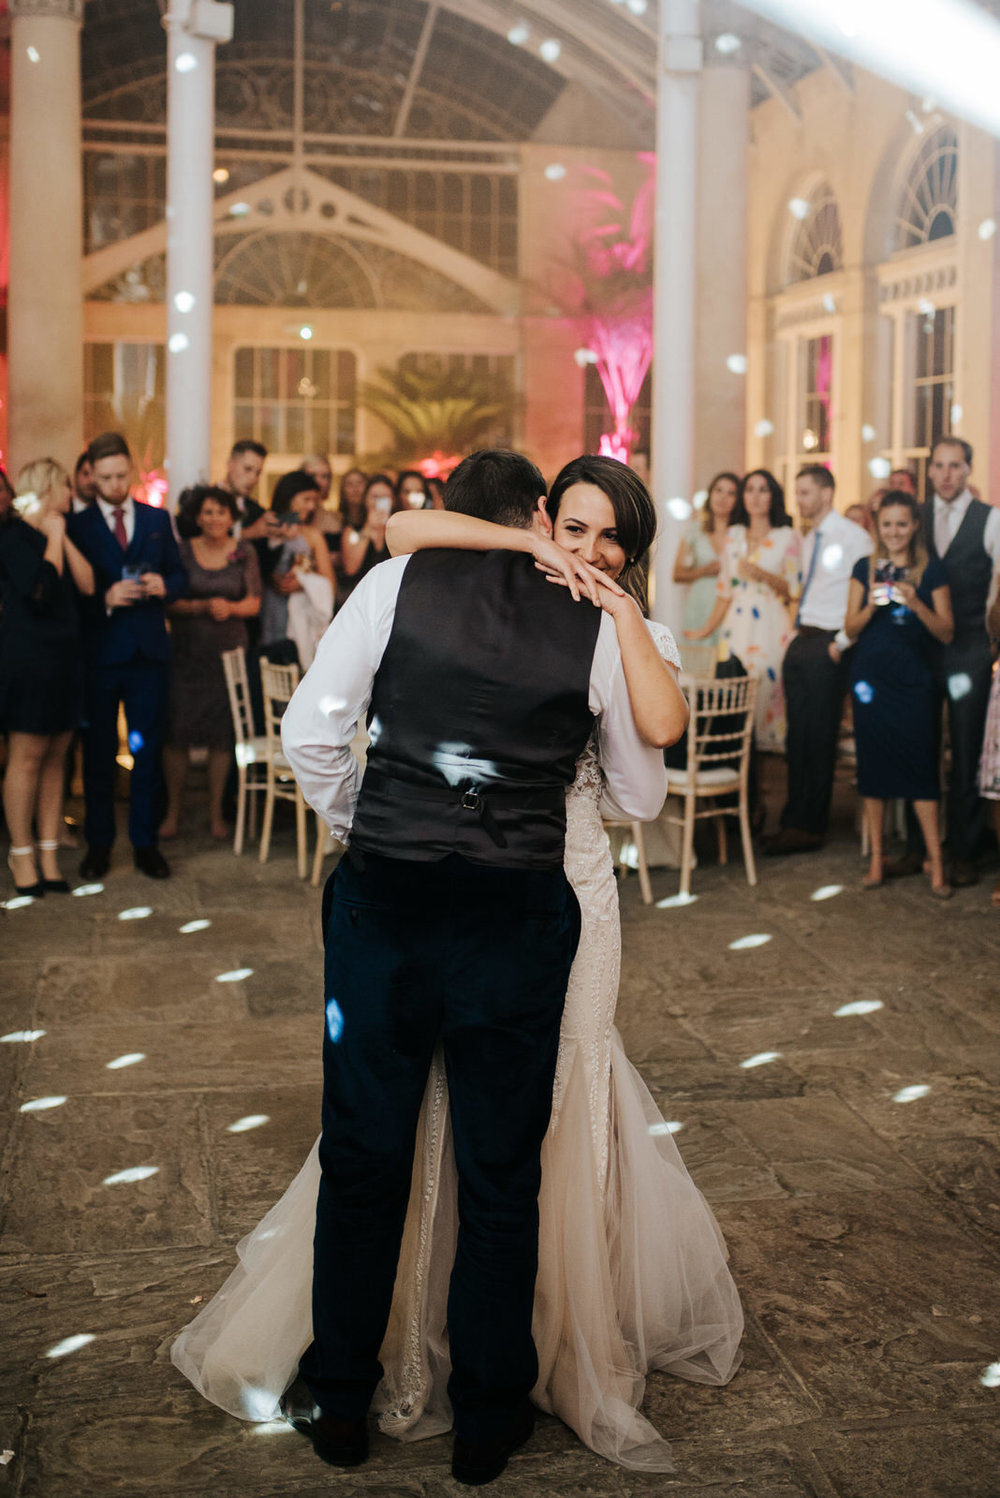 Bride hugs groom as they begin their first dance, flanked by guests